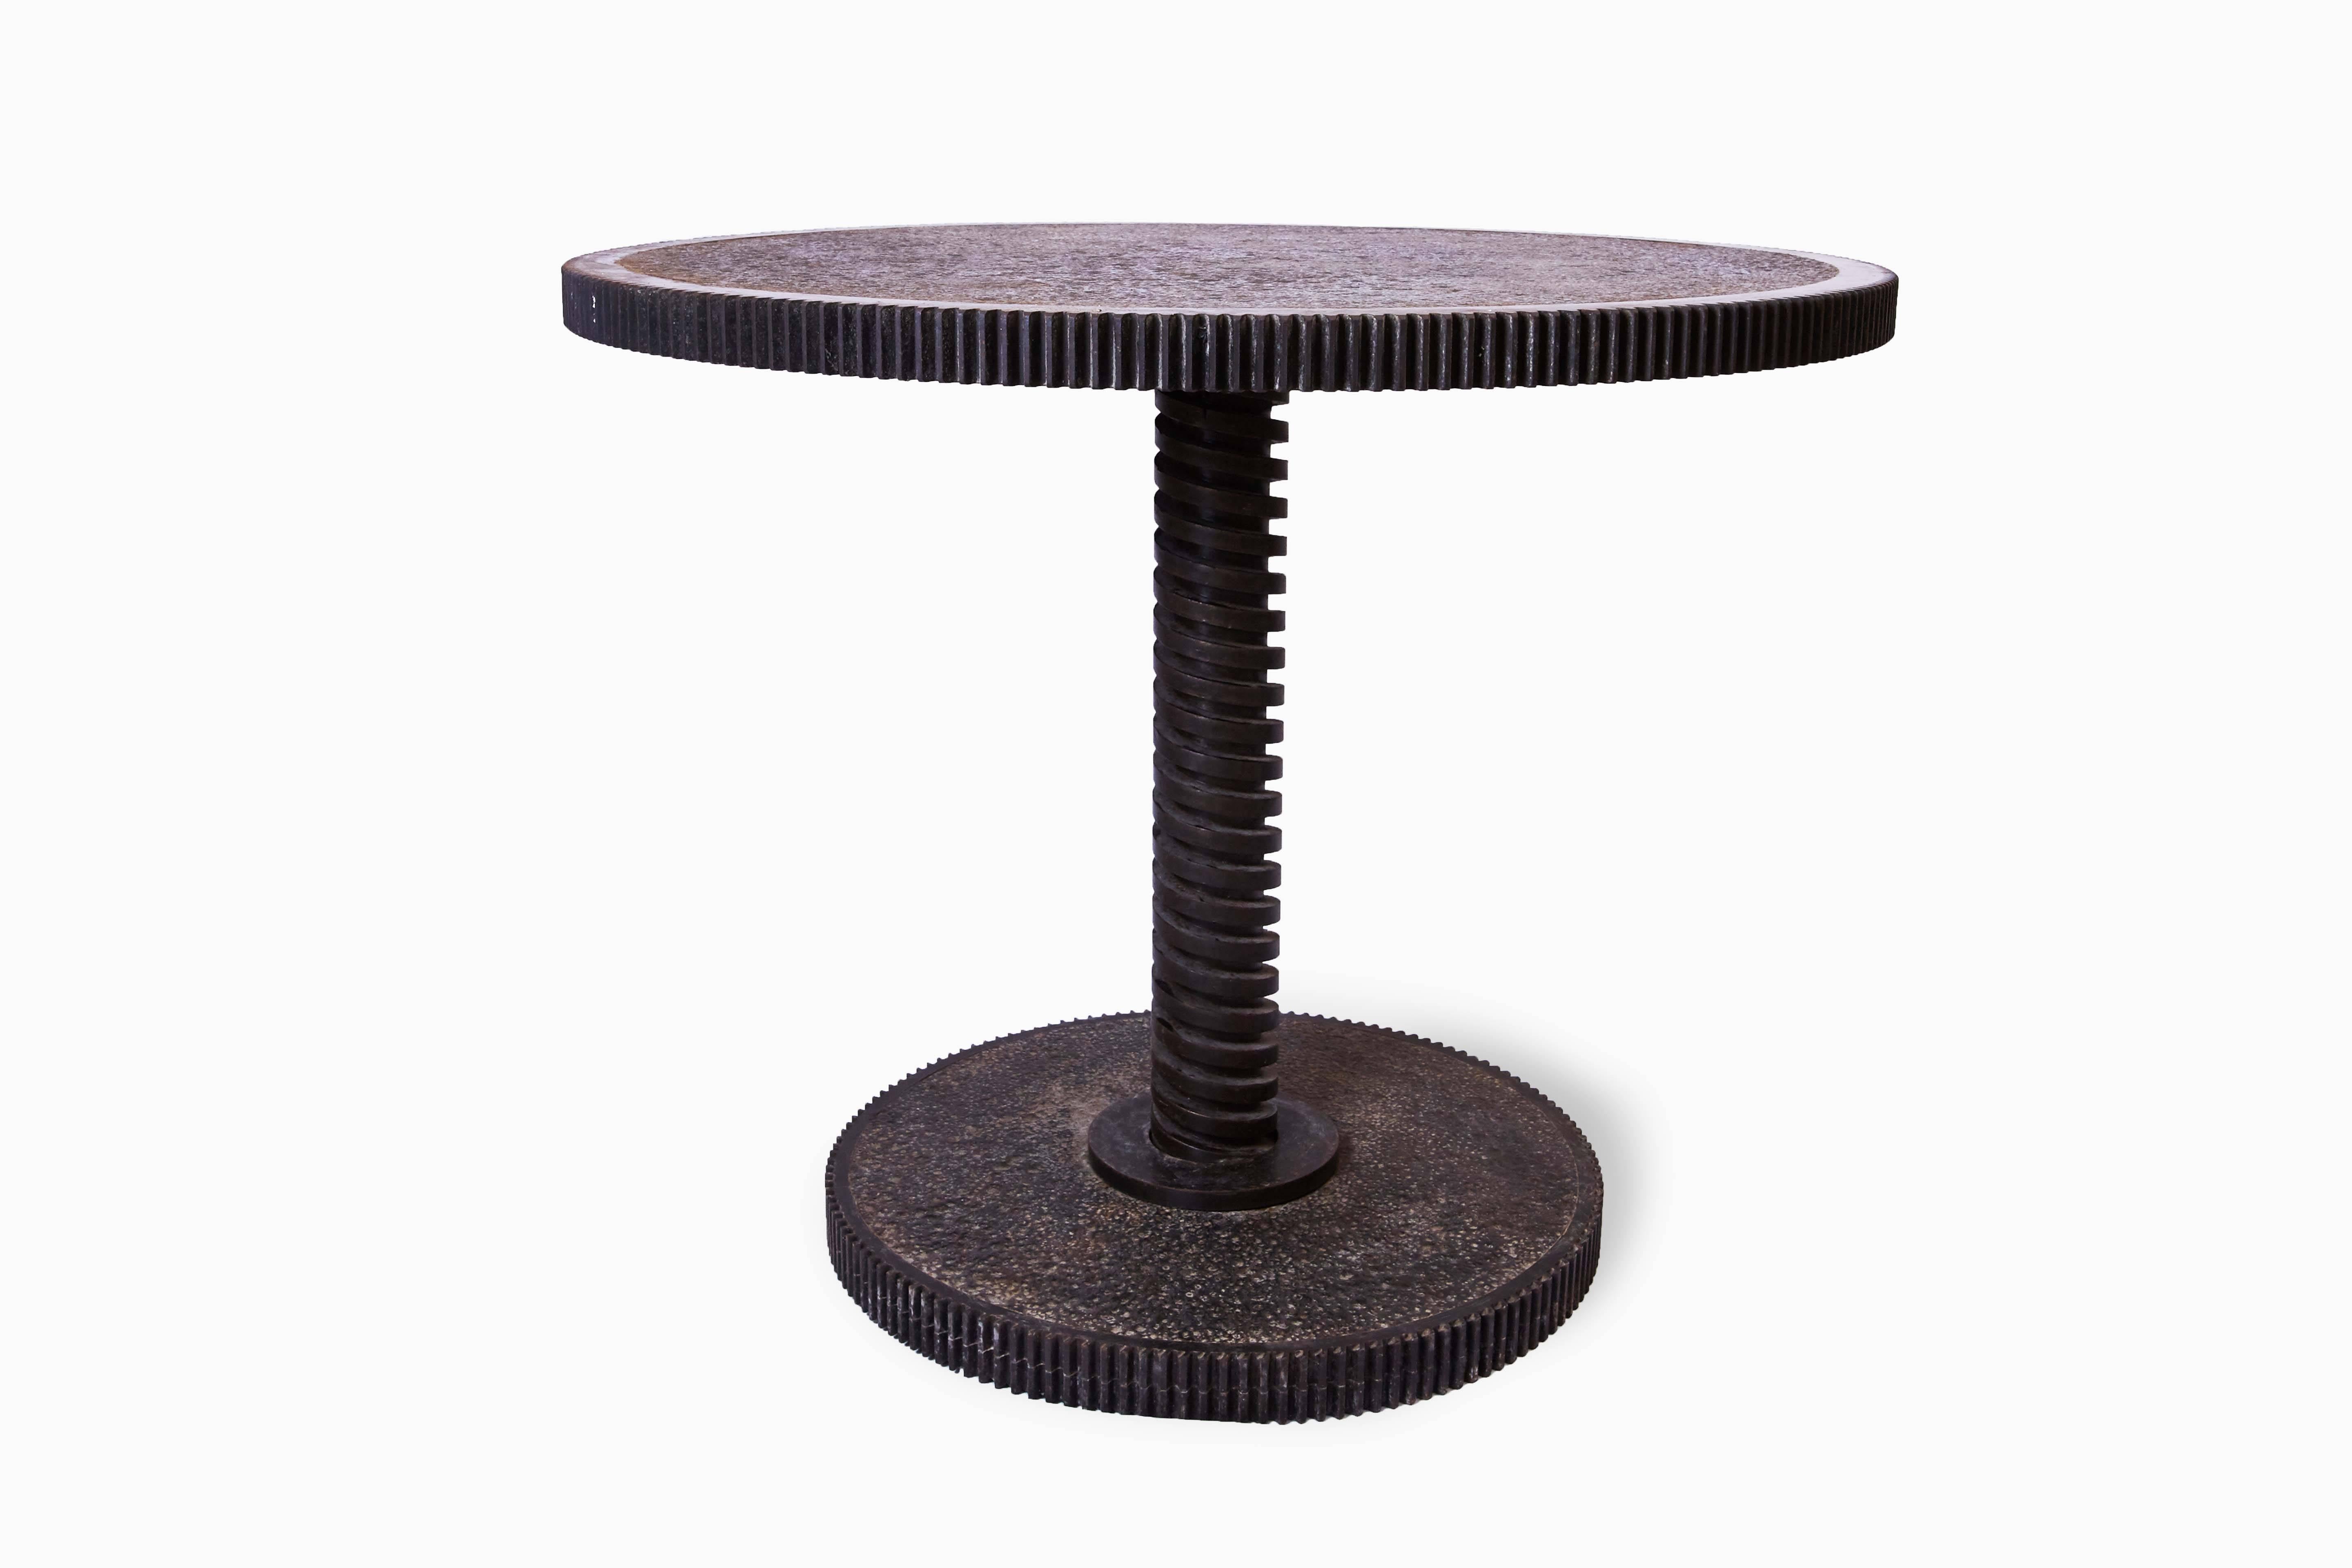 Welded Contemporary Brutalist Iron Gear Table For Sale